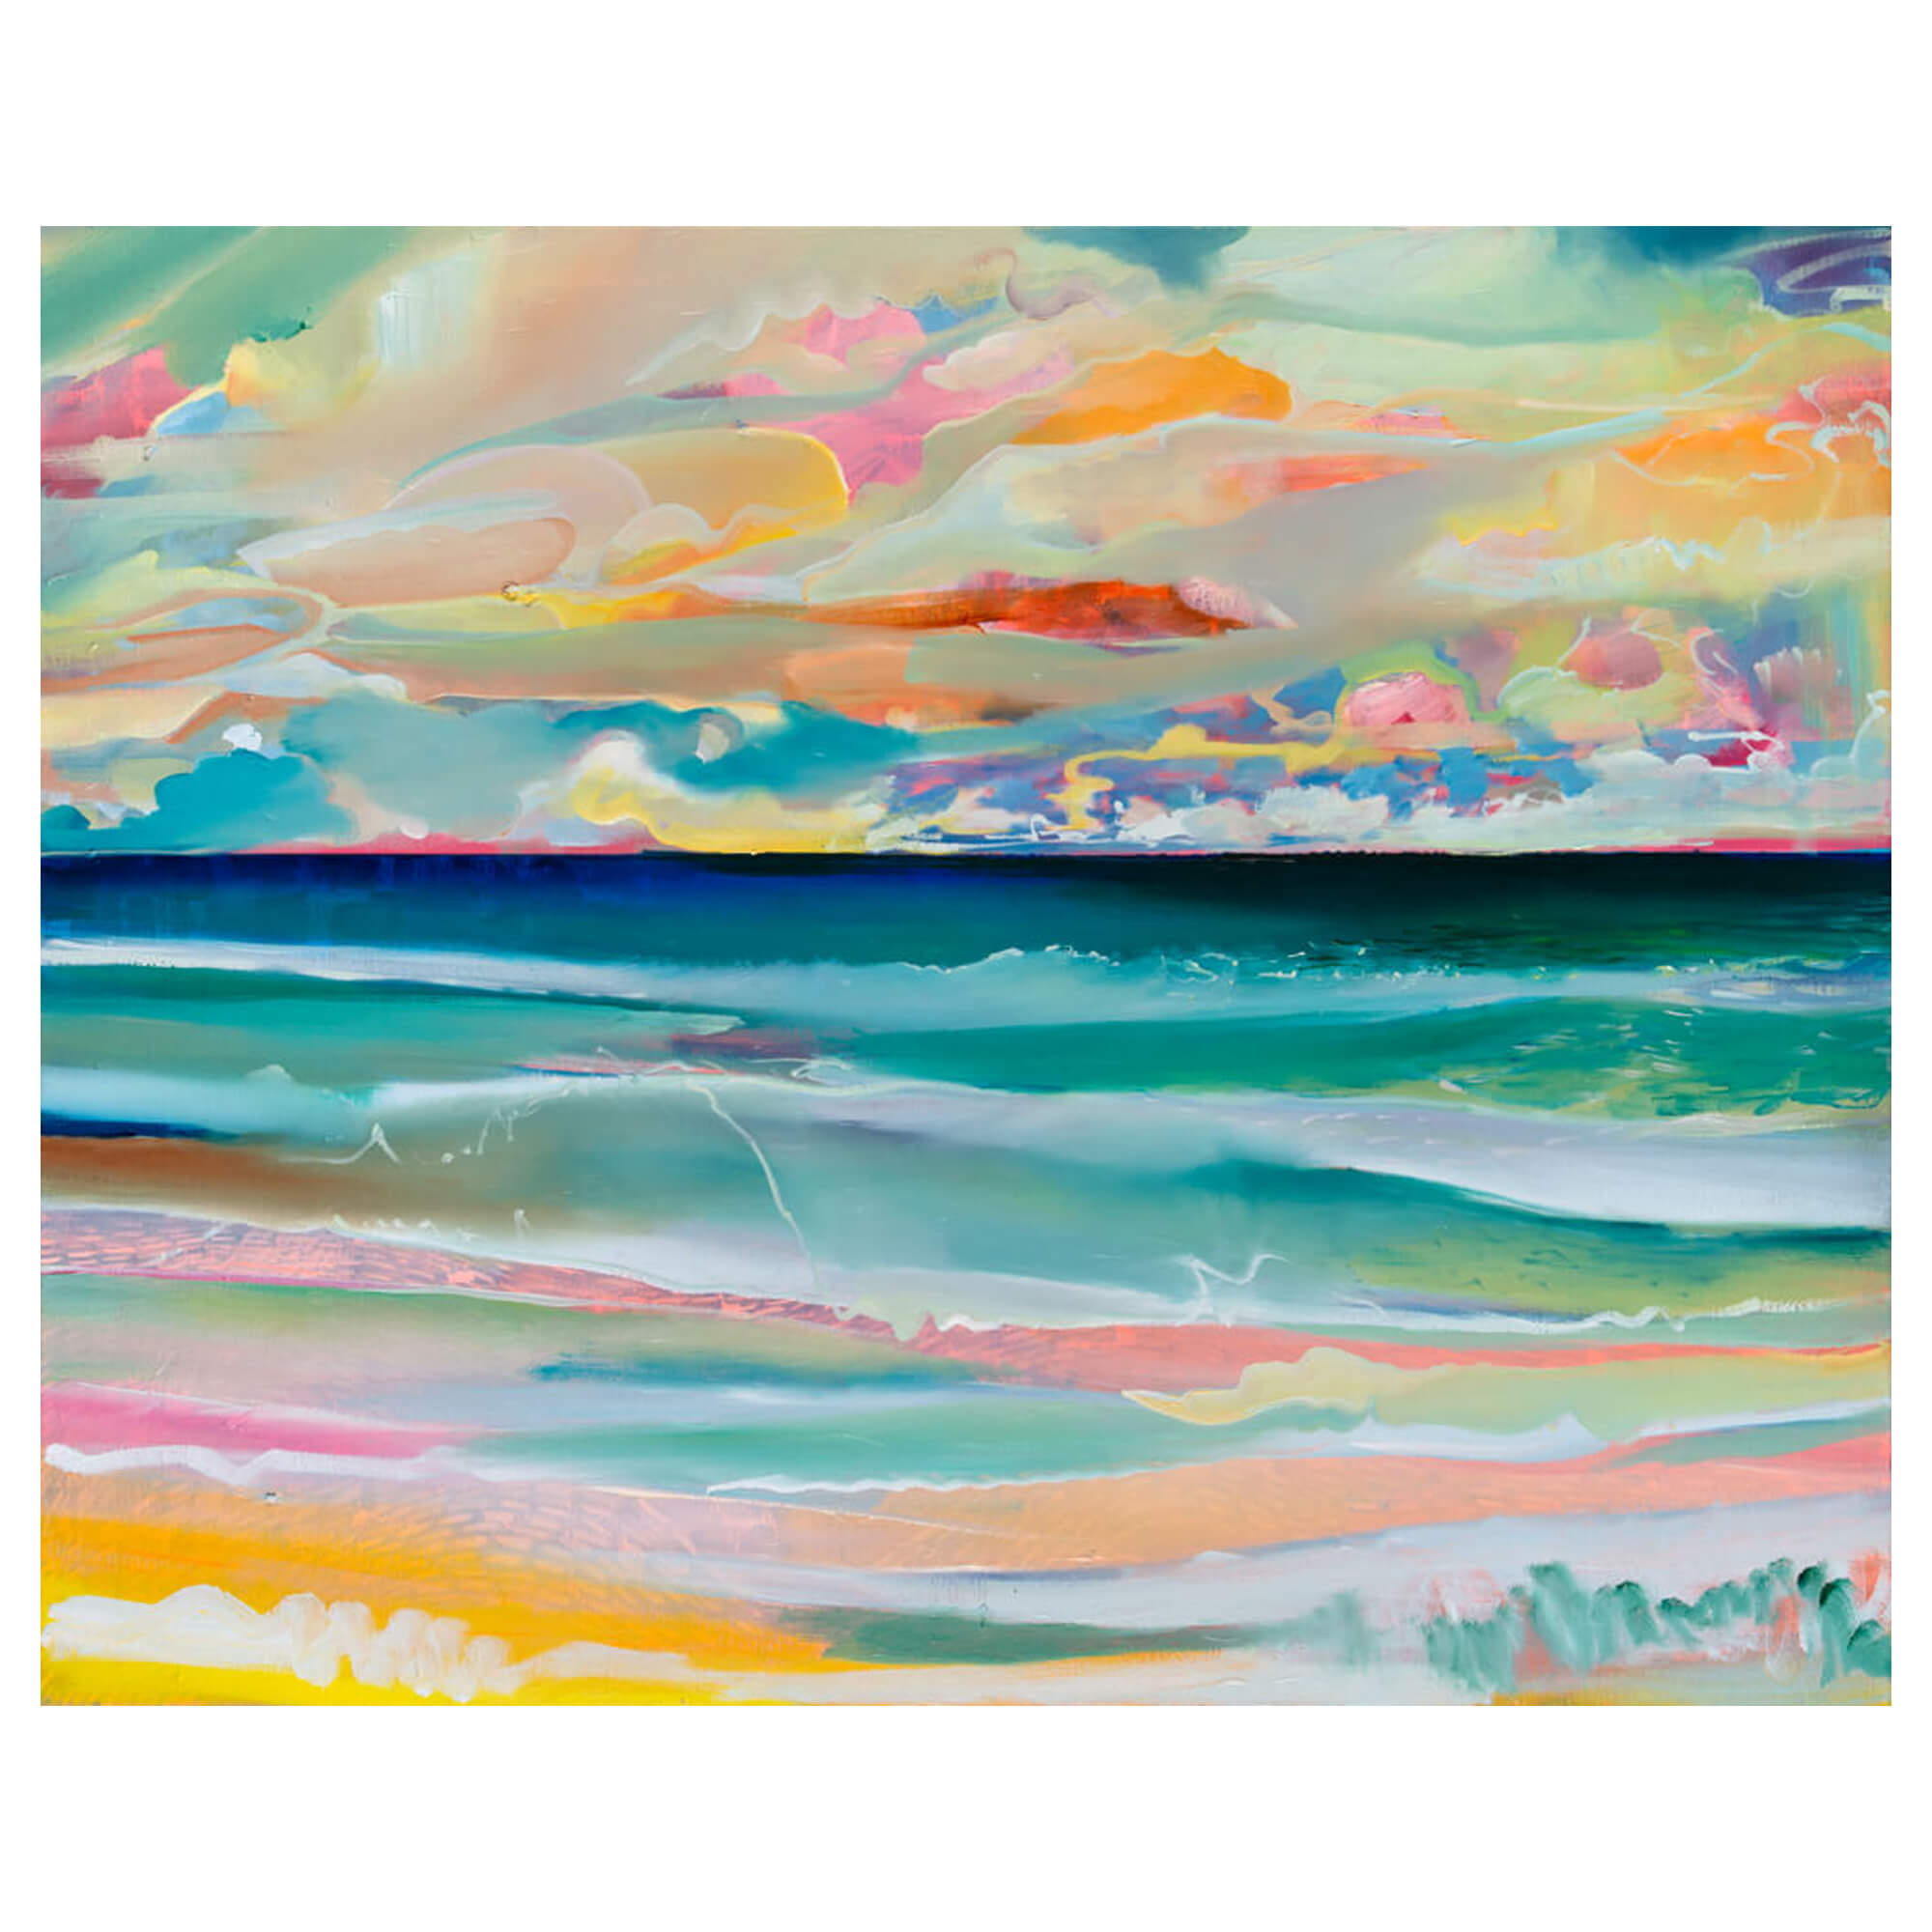 Canvas art print of an abstract artwork of a seascape with pink, yellow and teal hues by Hawaii artist Saumolia Puapuaga